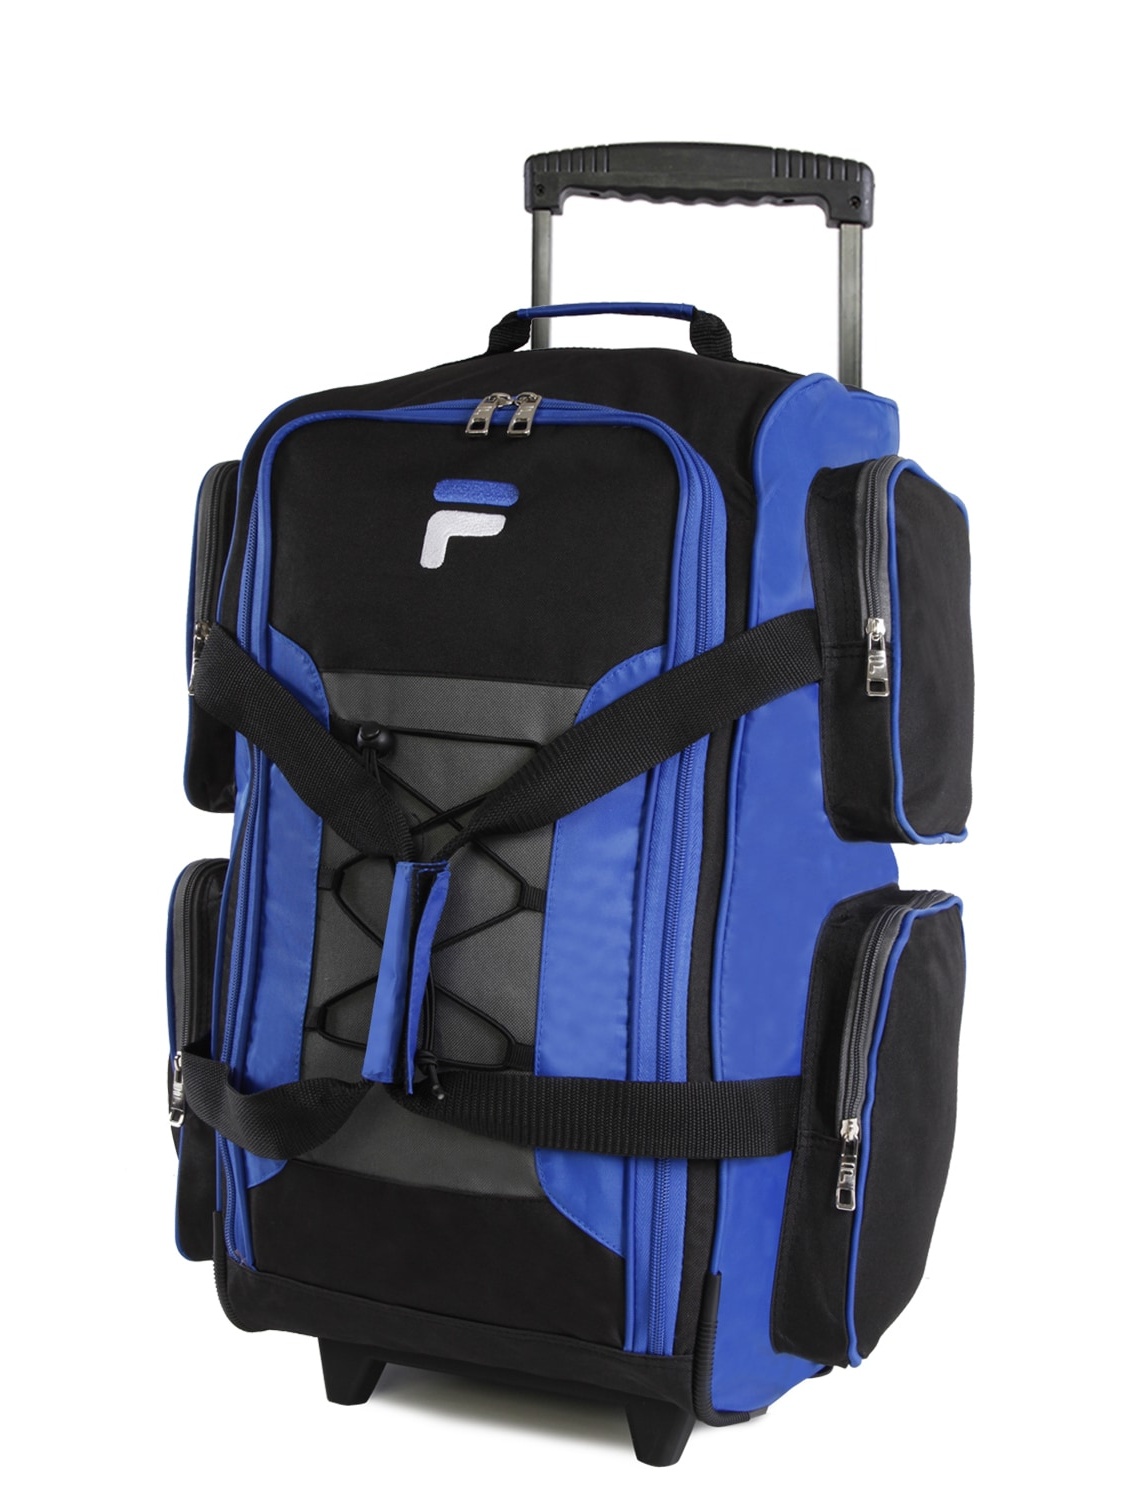 22-inch Lightweight Carry-on Rolling Duffel Bag - image 1 of 5